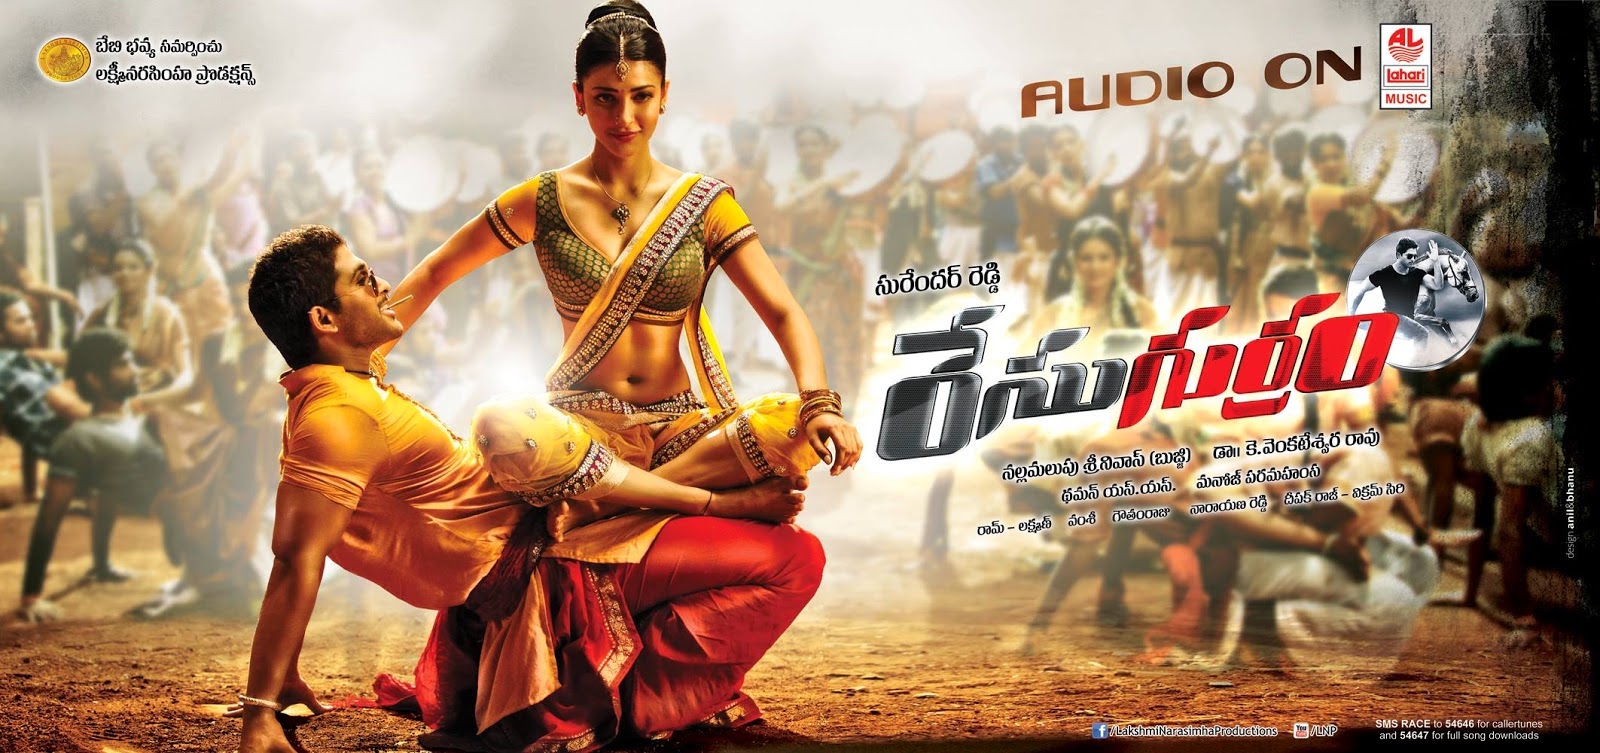 Telugu mp3 video songs free download for mobile pc